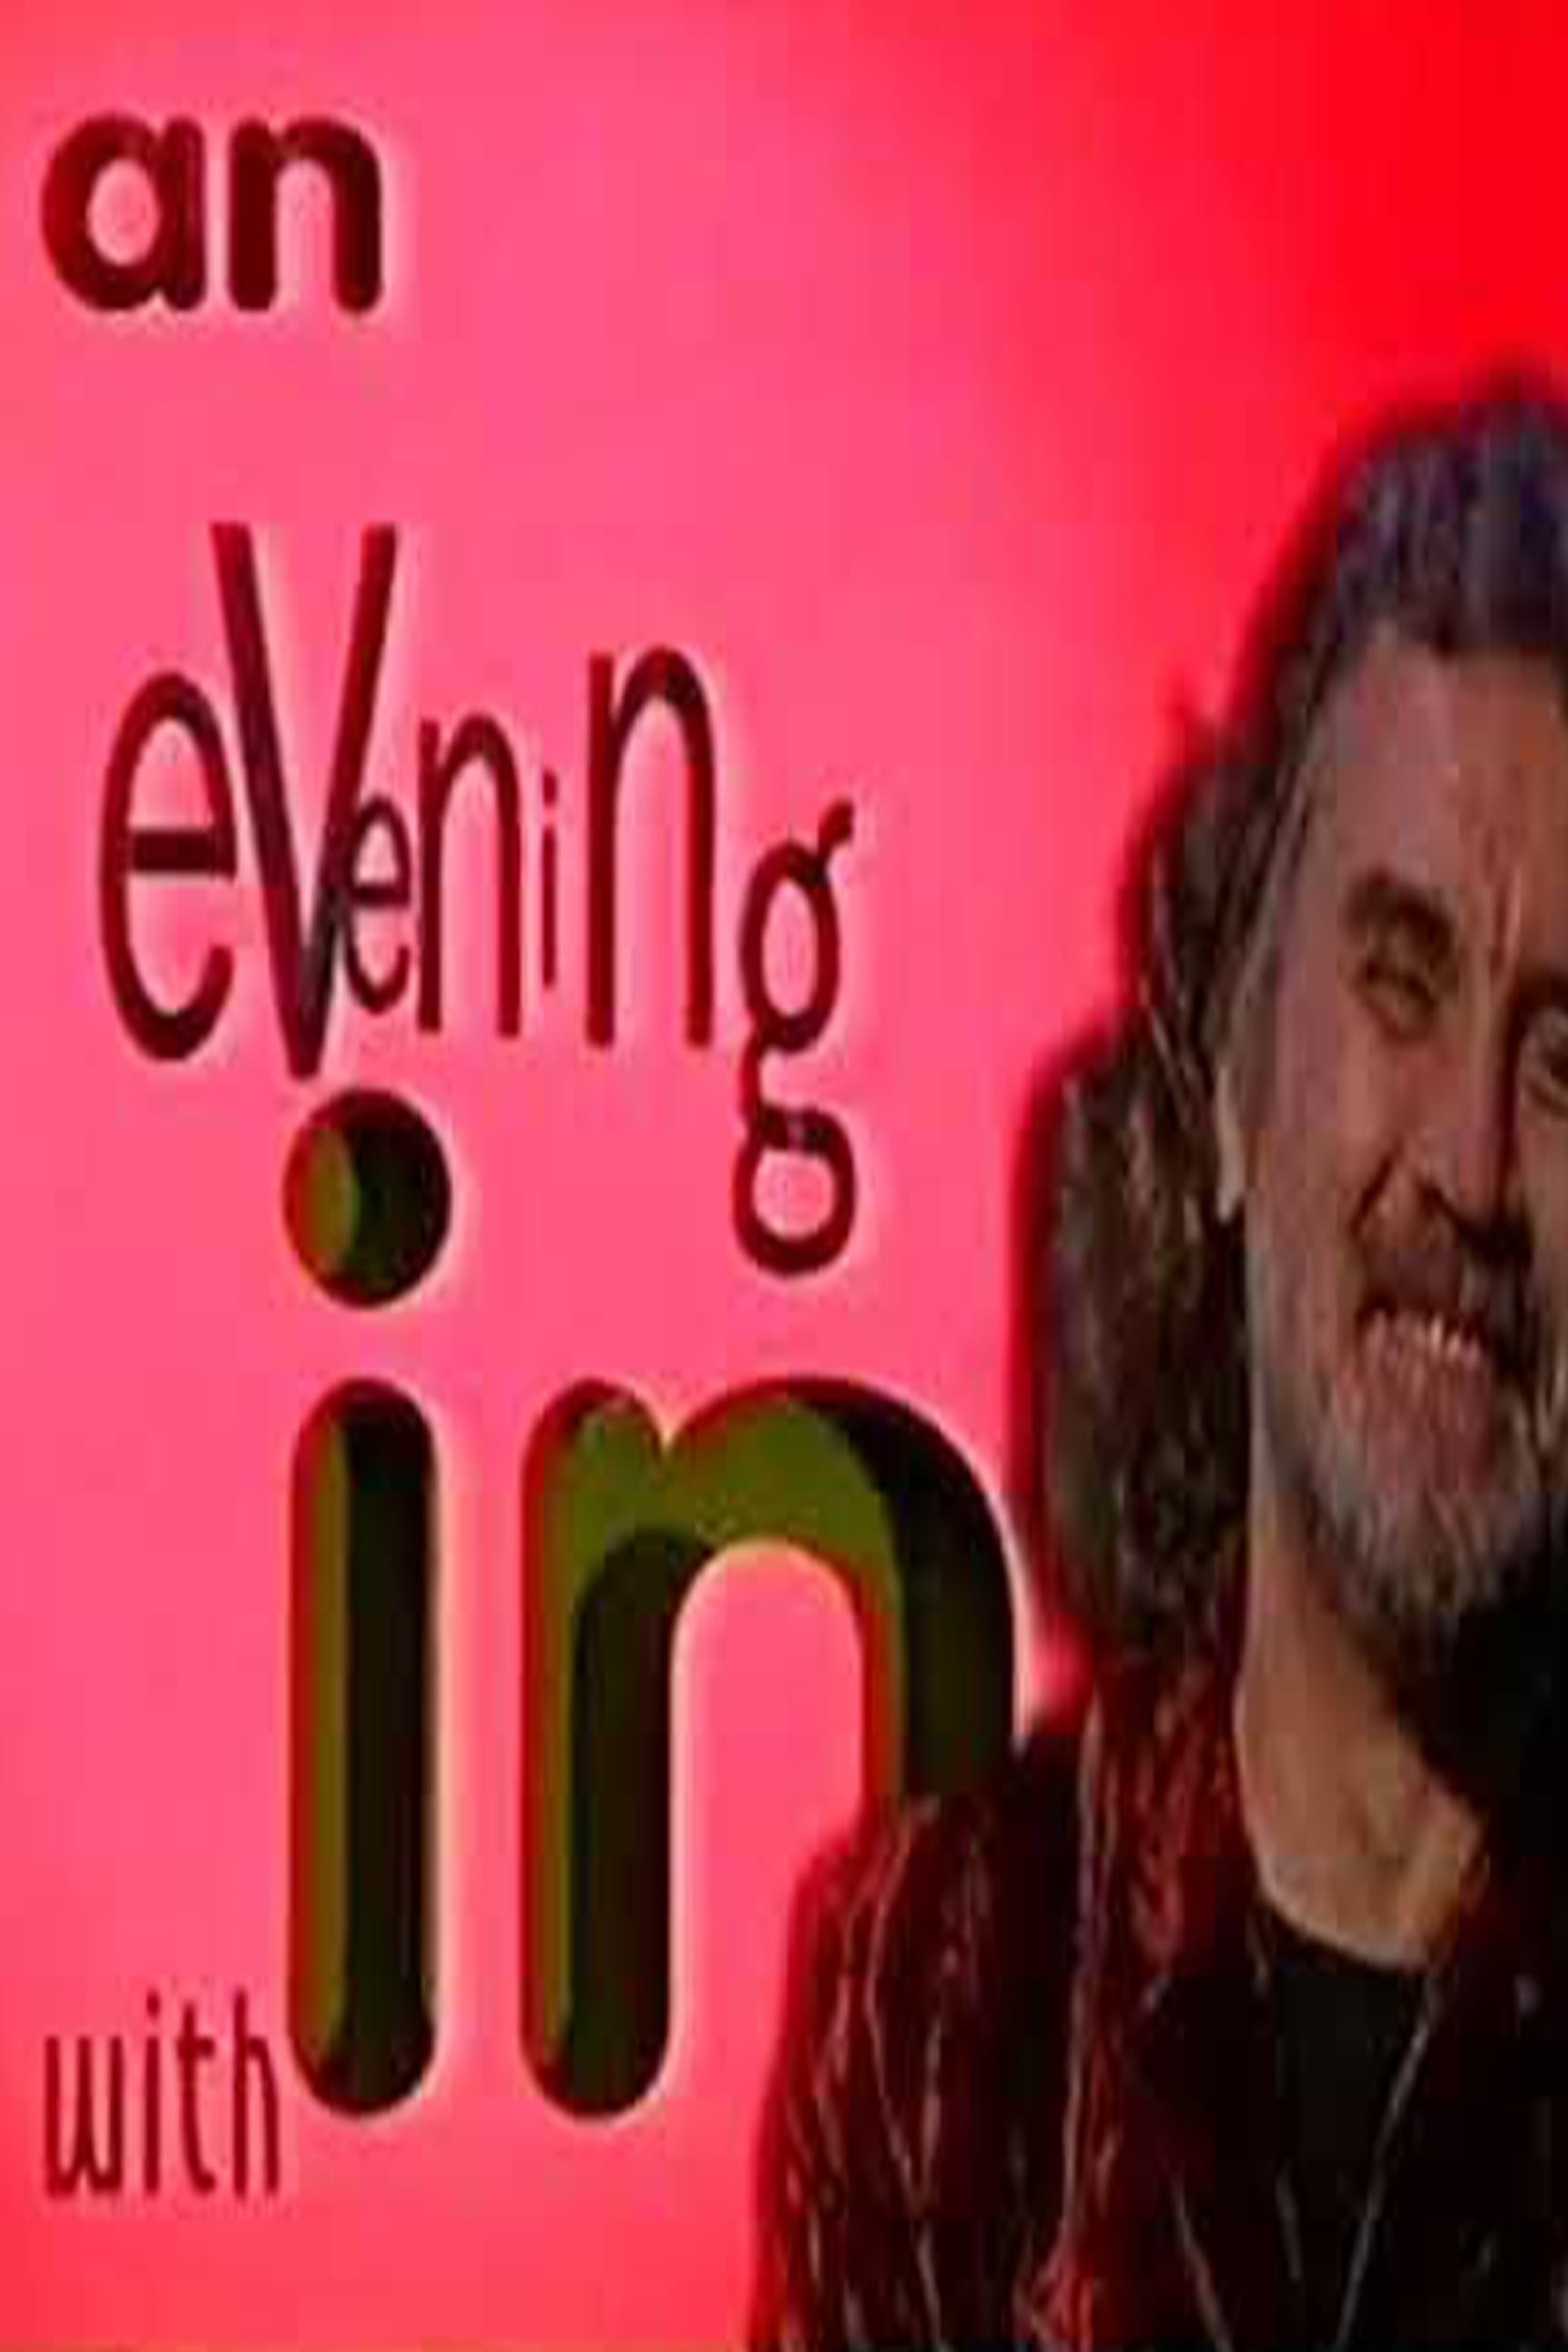 Billy Connolly's World Tour of Television